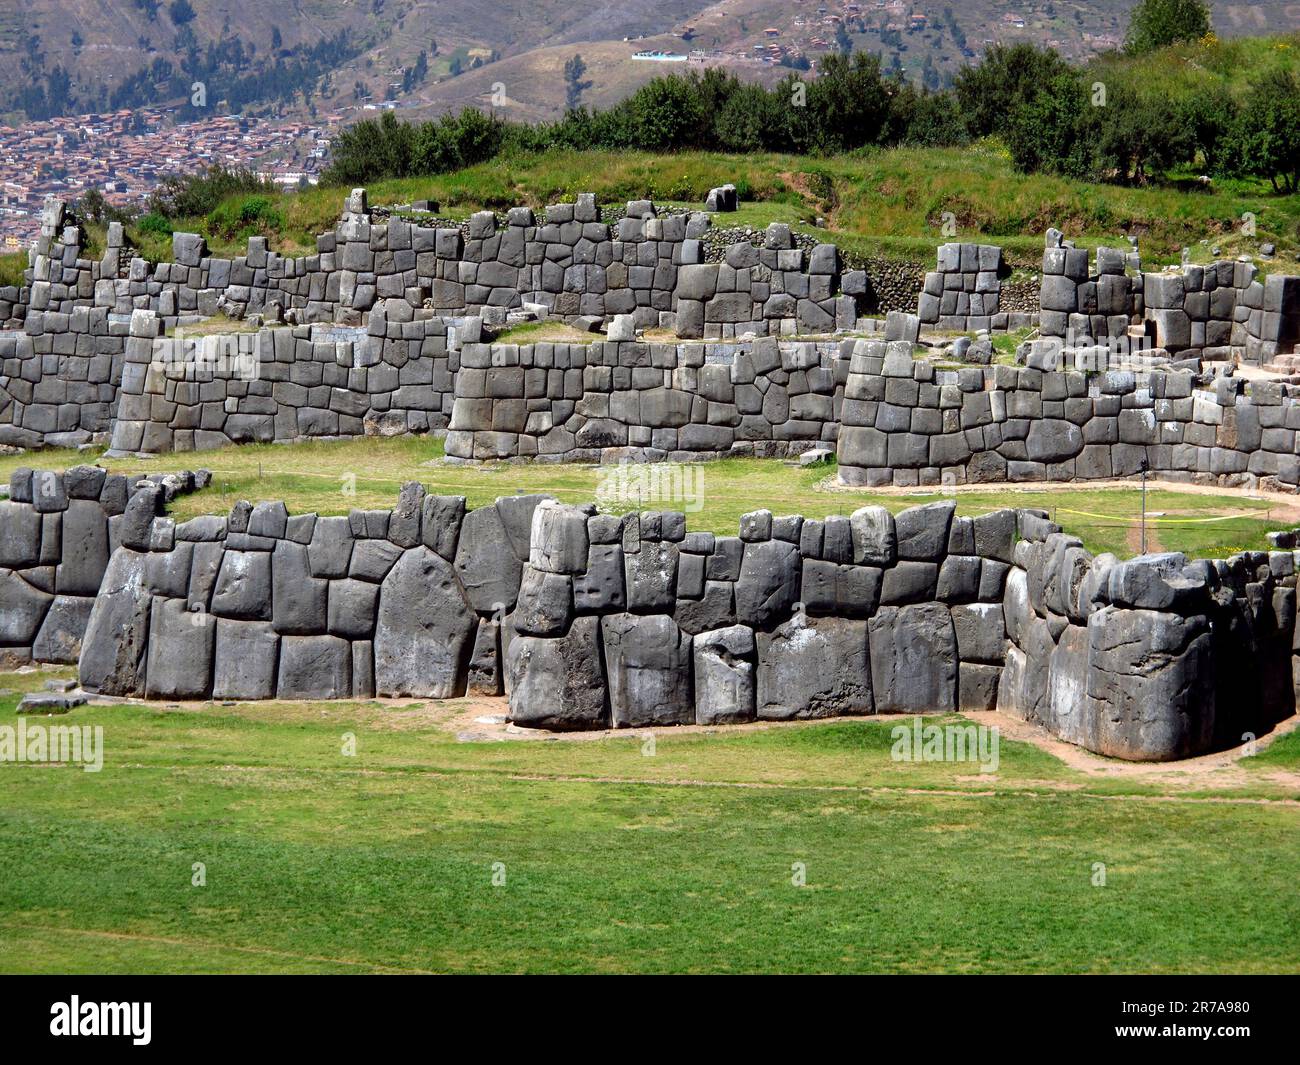 How to pronounce the name of that awesome ruins above Cusco